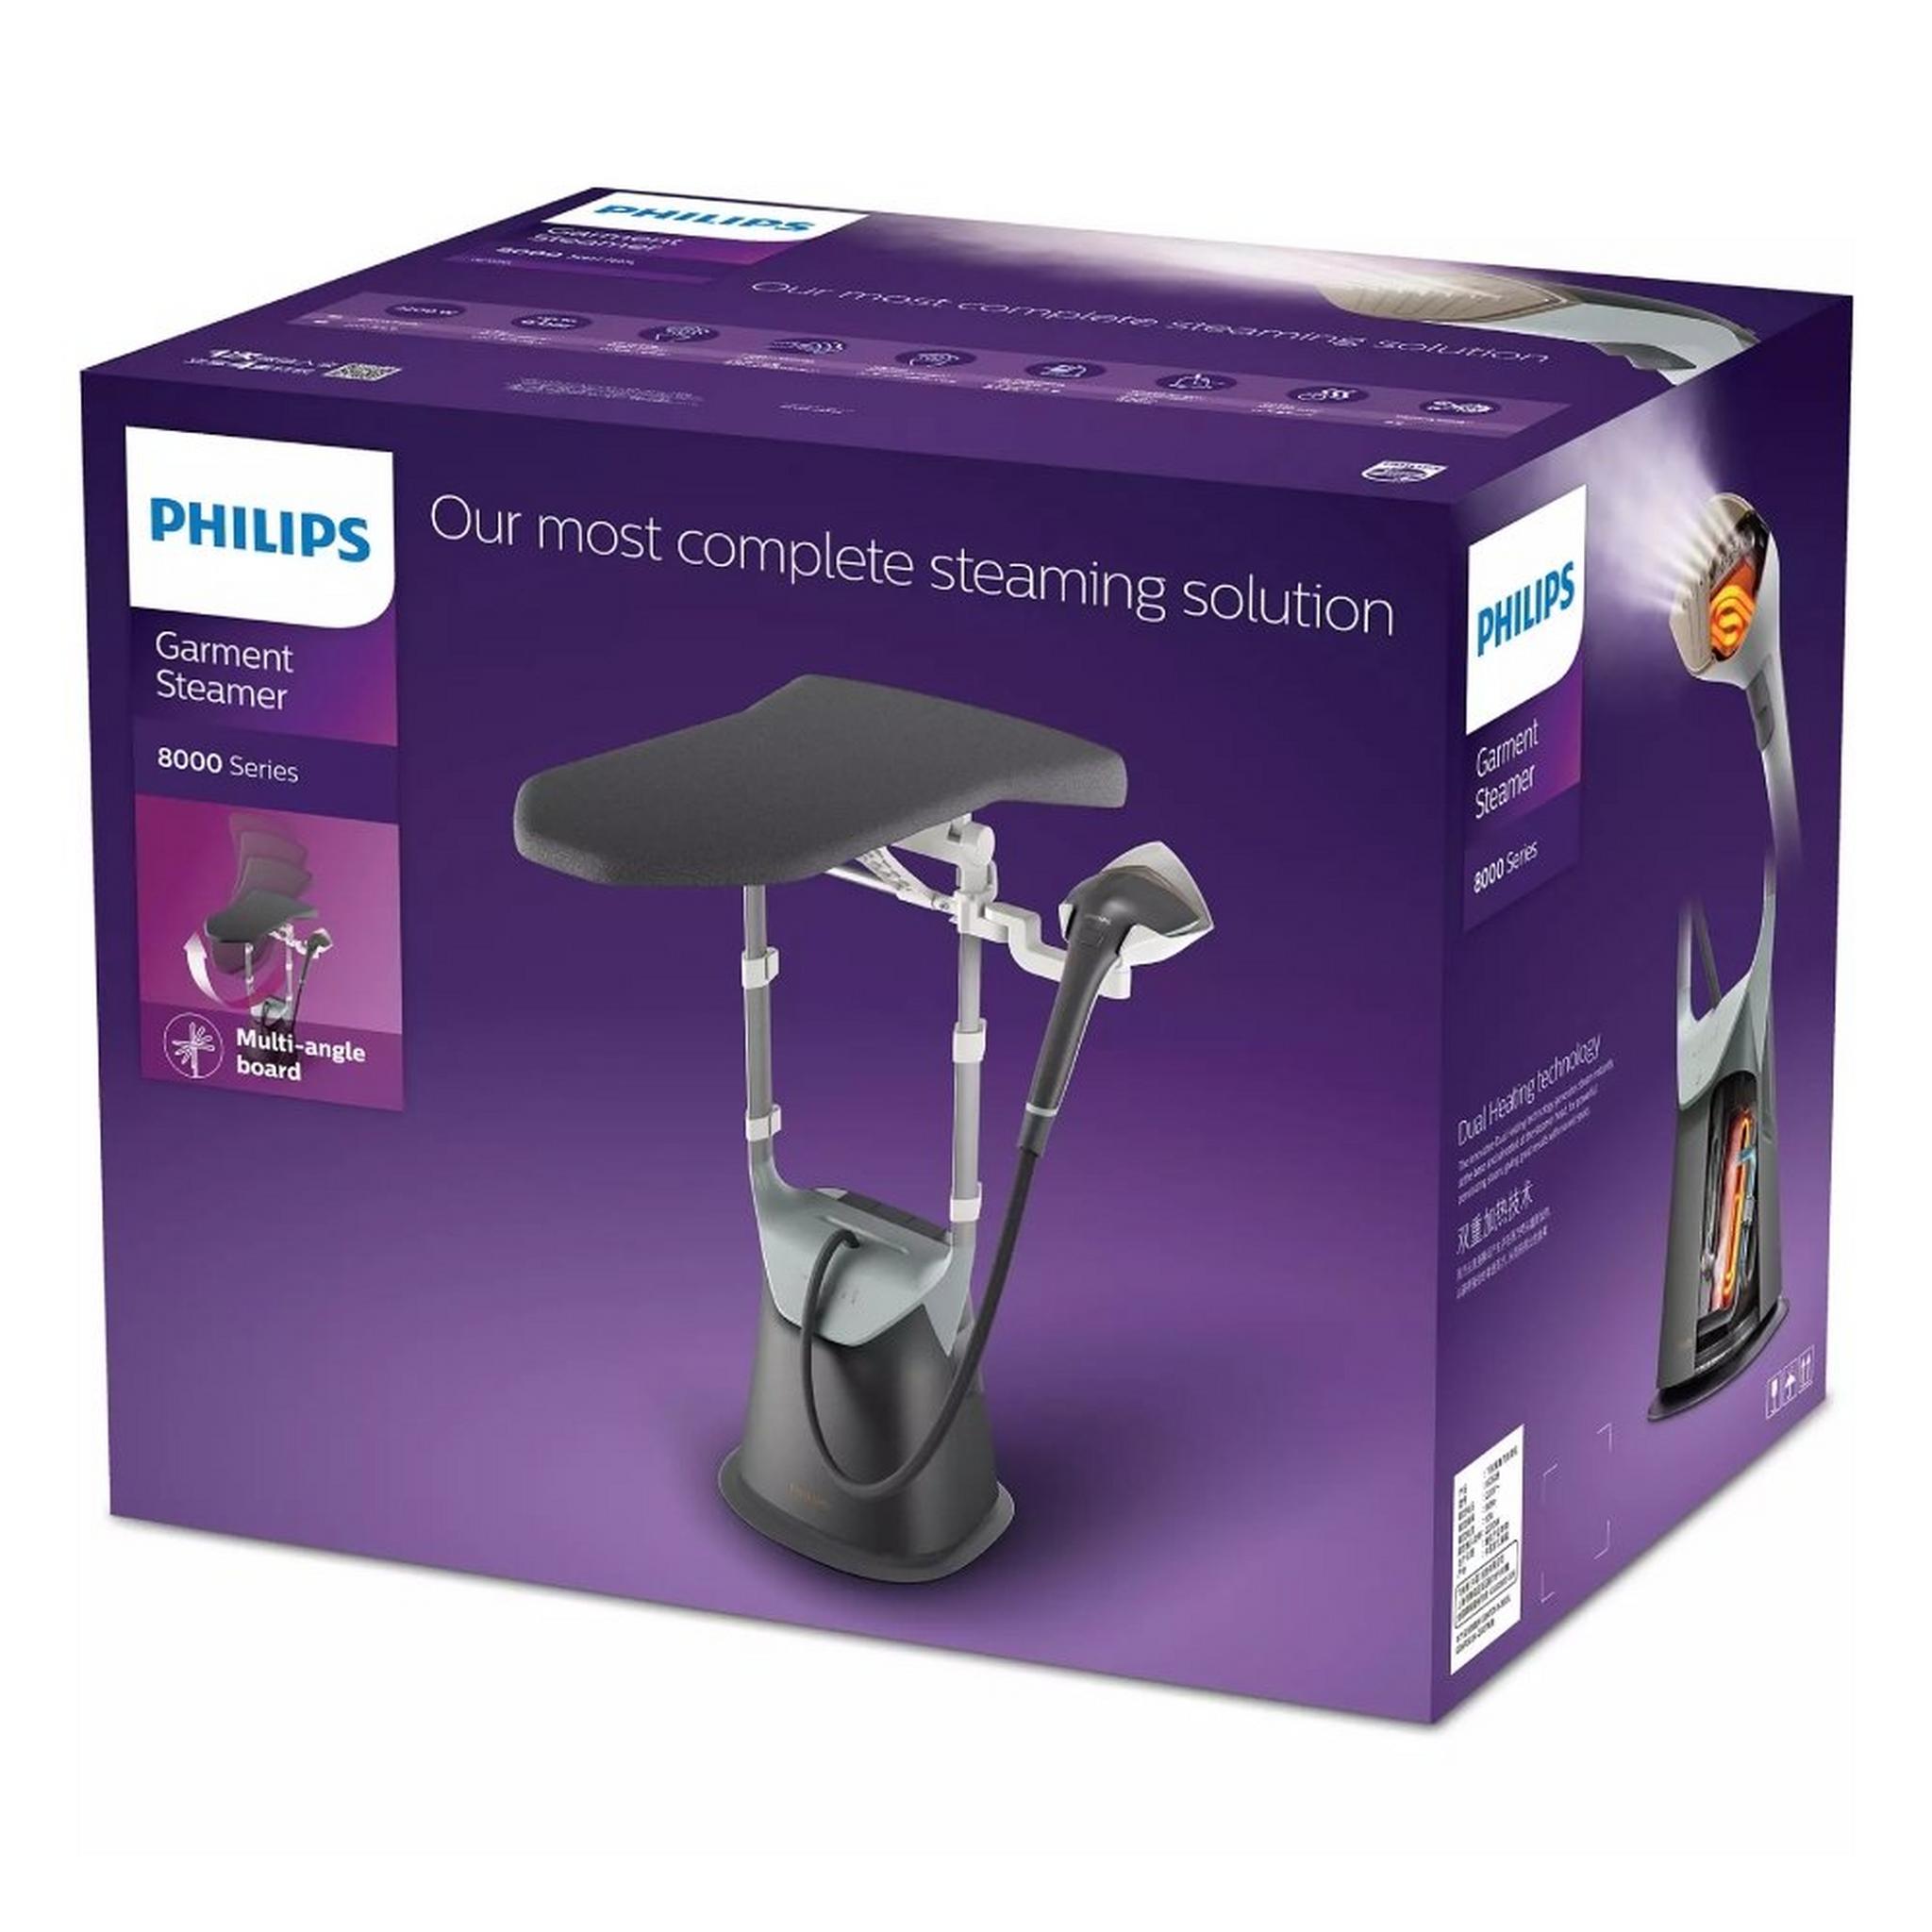 Philips All-in-One ironing solution 8000 Series (GC628/86)